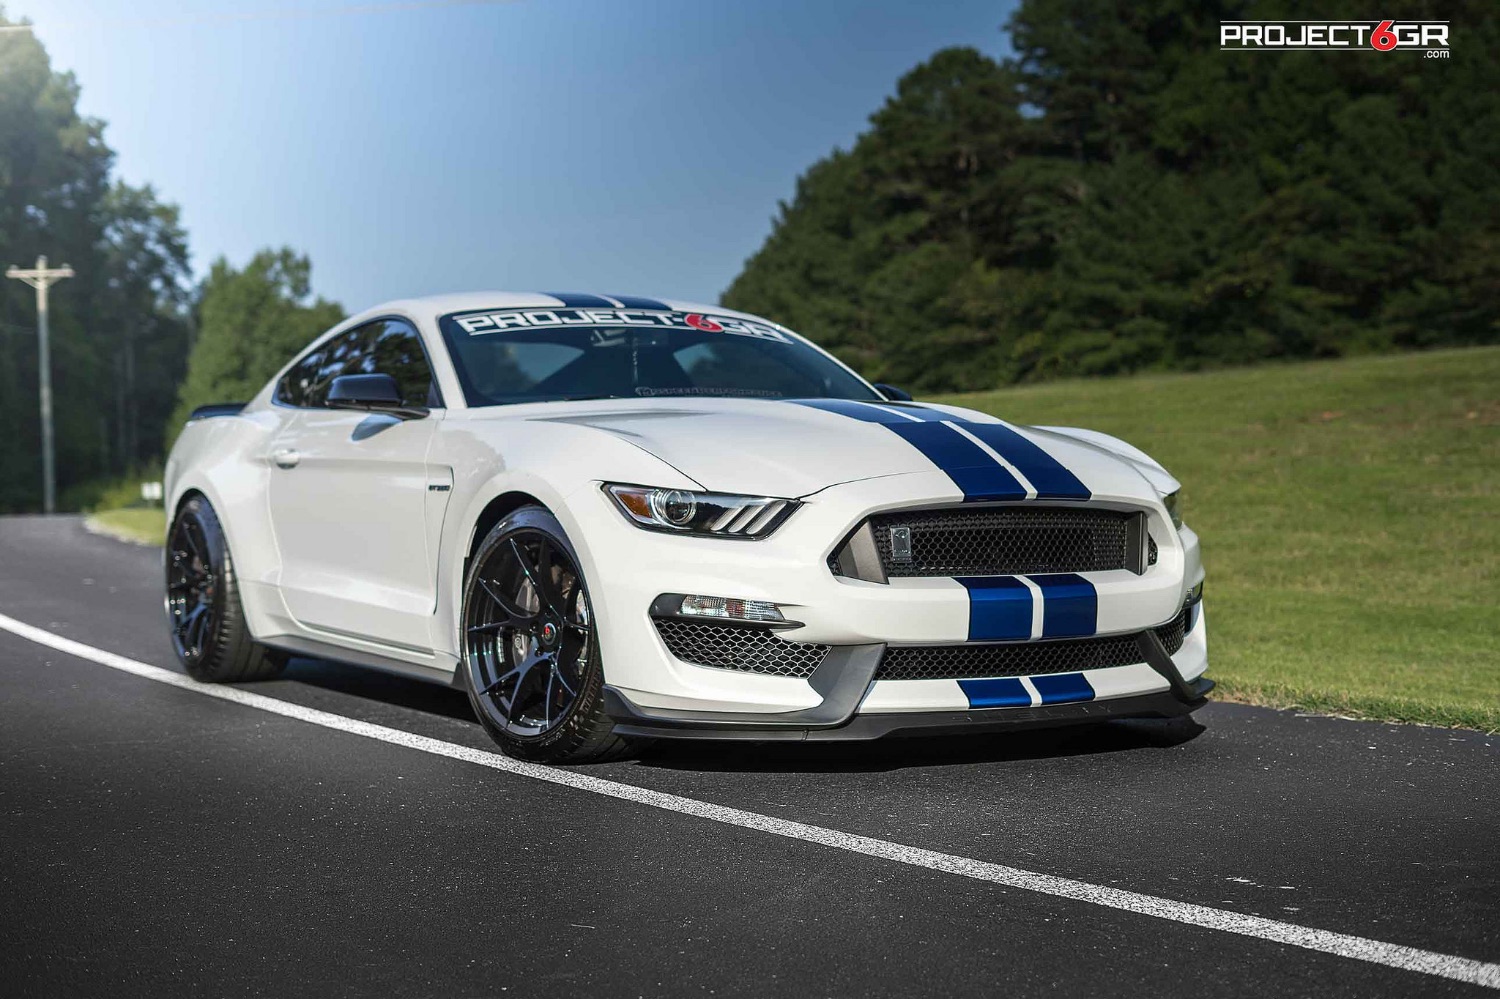 project-6gr-10-ten-ox-ford-whiteshelby-gt350-gloss-black-wheels-01